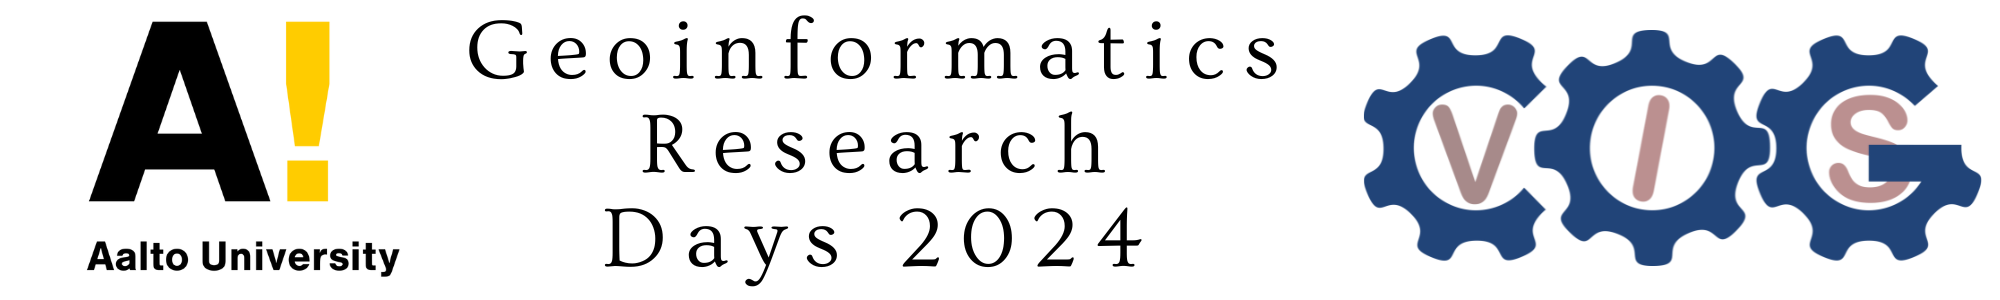 Geoinformatics Research Days 2024 - Home